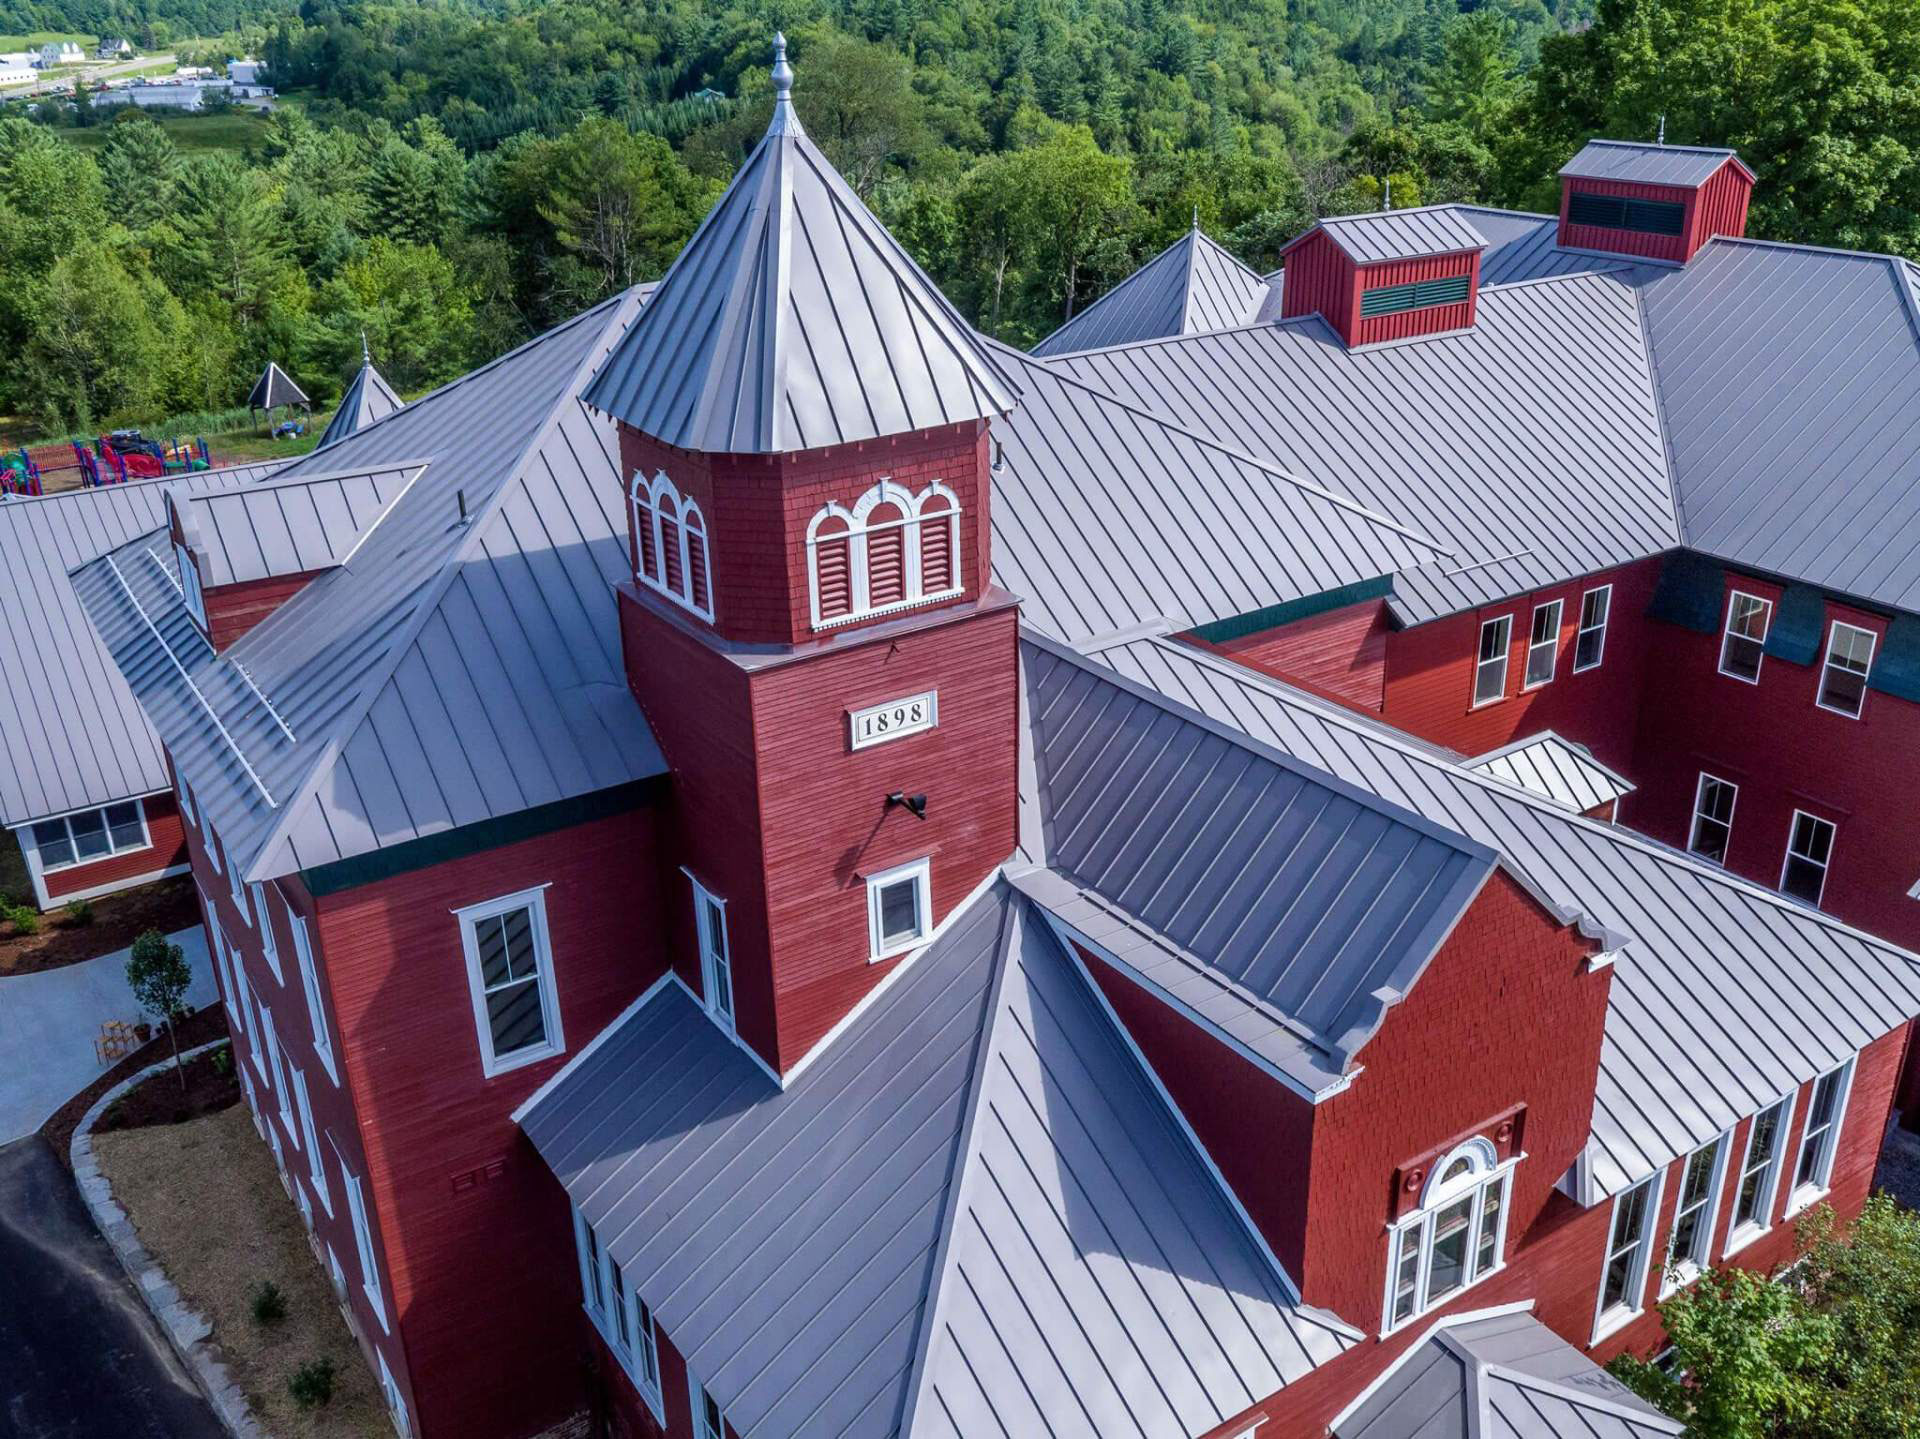 New standing seam roofing on Hyde Park Elementary School